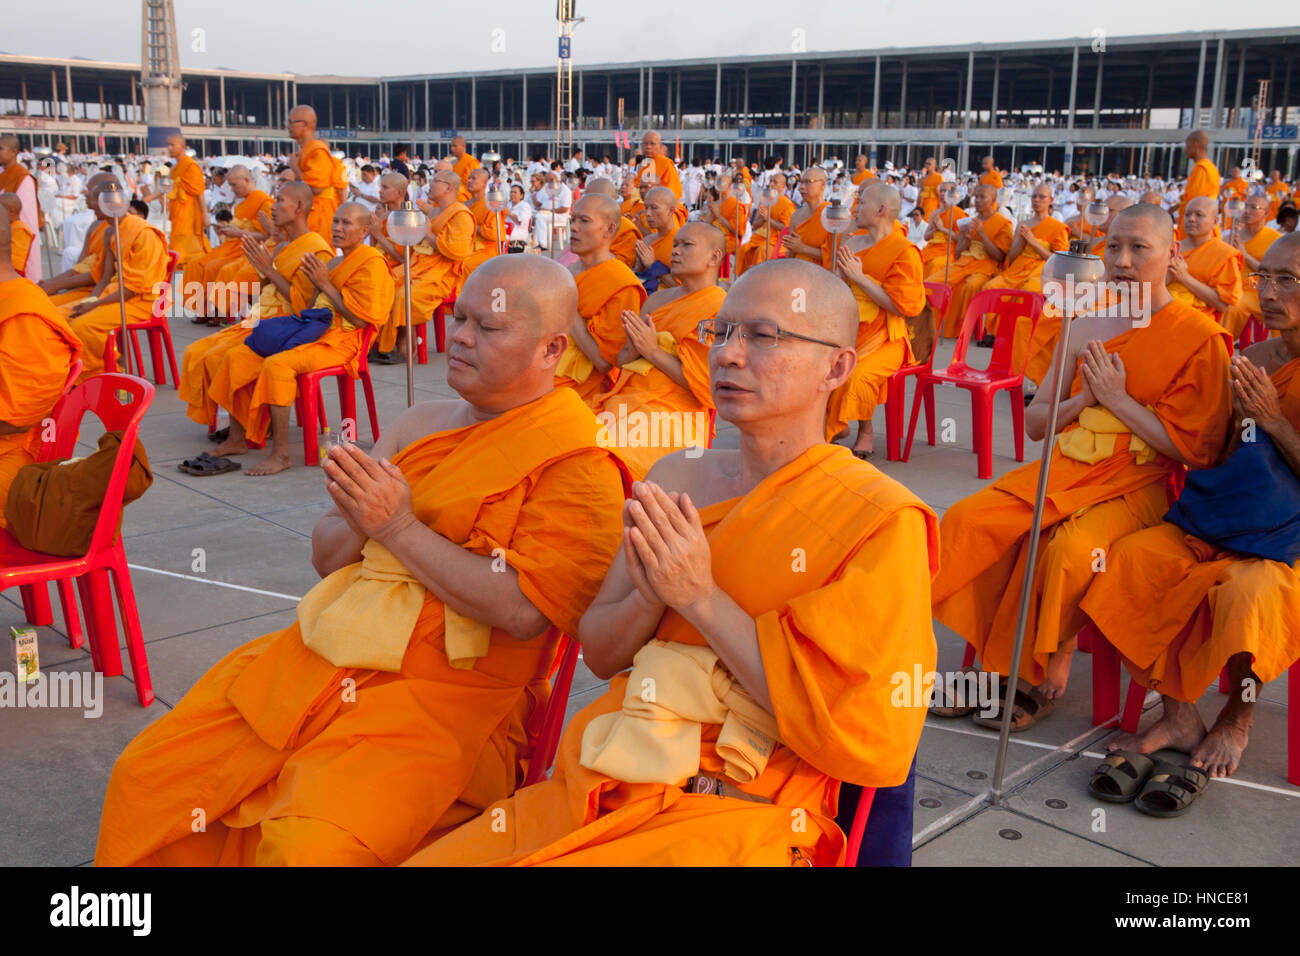 Bangkok, Thailand. 11th Feb, 2017. Thousands of Buddhist devotees and monks take part in evening prayers to mark Makha Bucha Day at Wat Dhammakaya temple, just north of Bangkok.  Makha Bucha Day is held in celebration of the teachings of the Lord Buddha. Credit: PixelPro/Alamy Live News Stock Photo